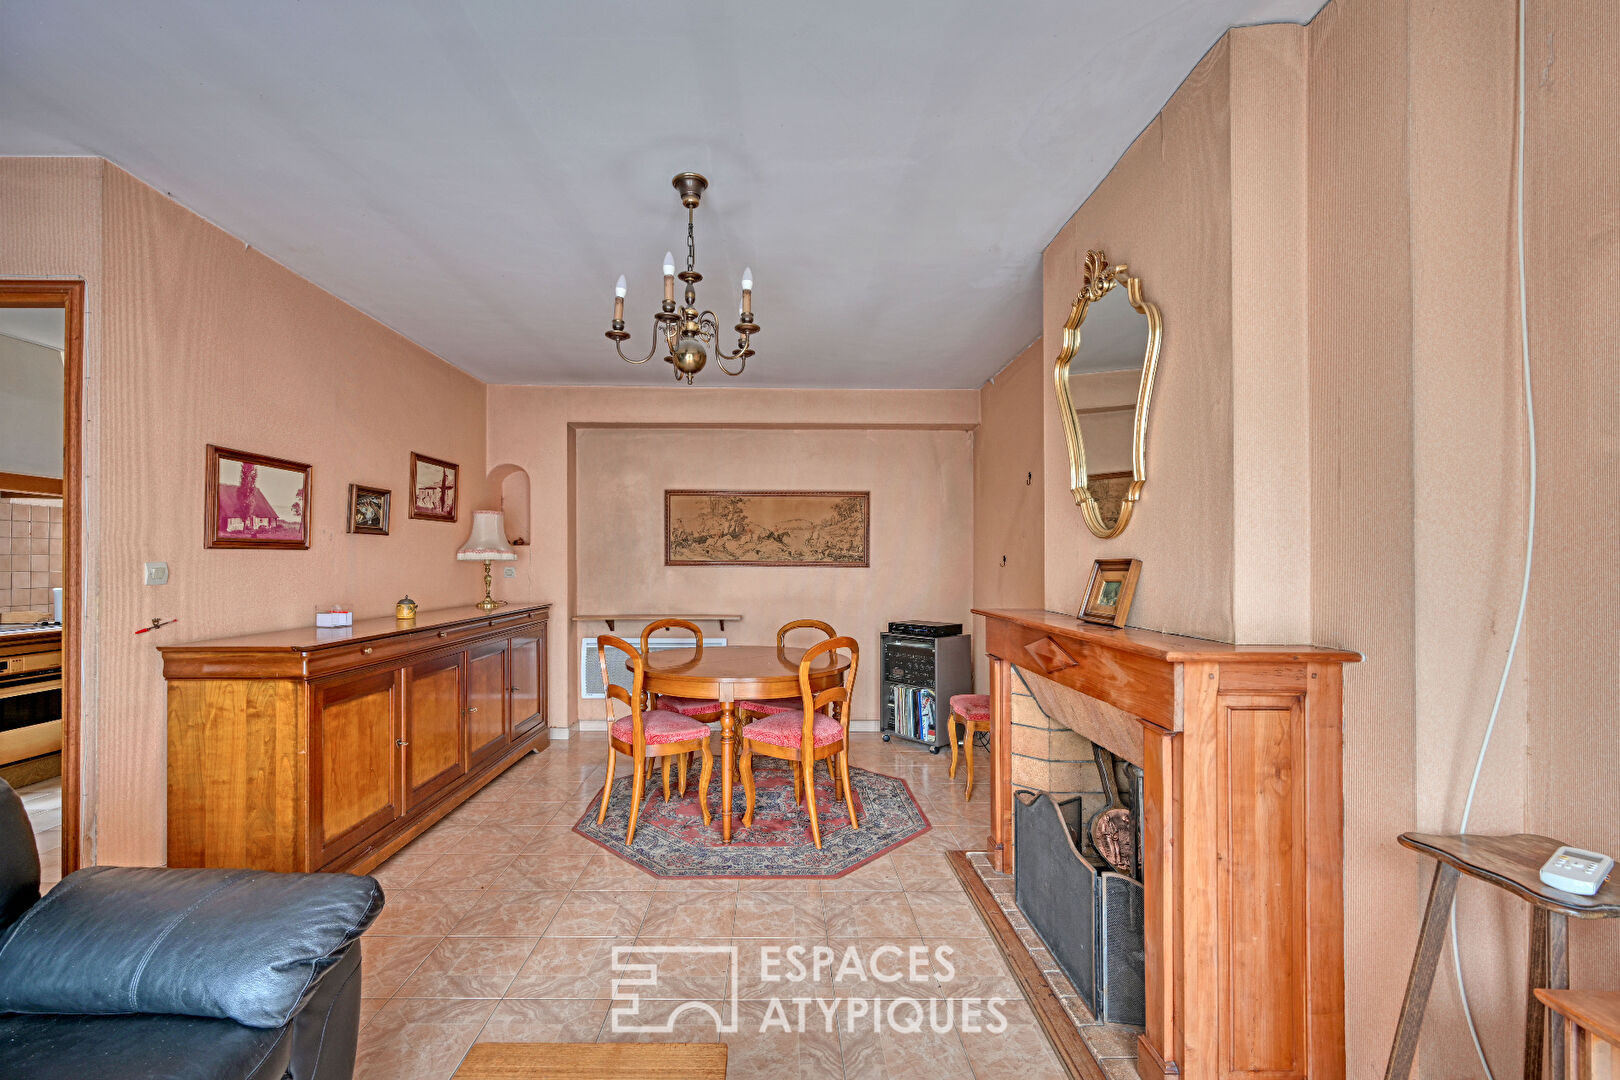 Detached house to renovate with large plot of land in Montpellier